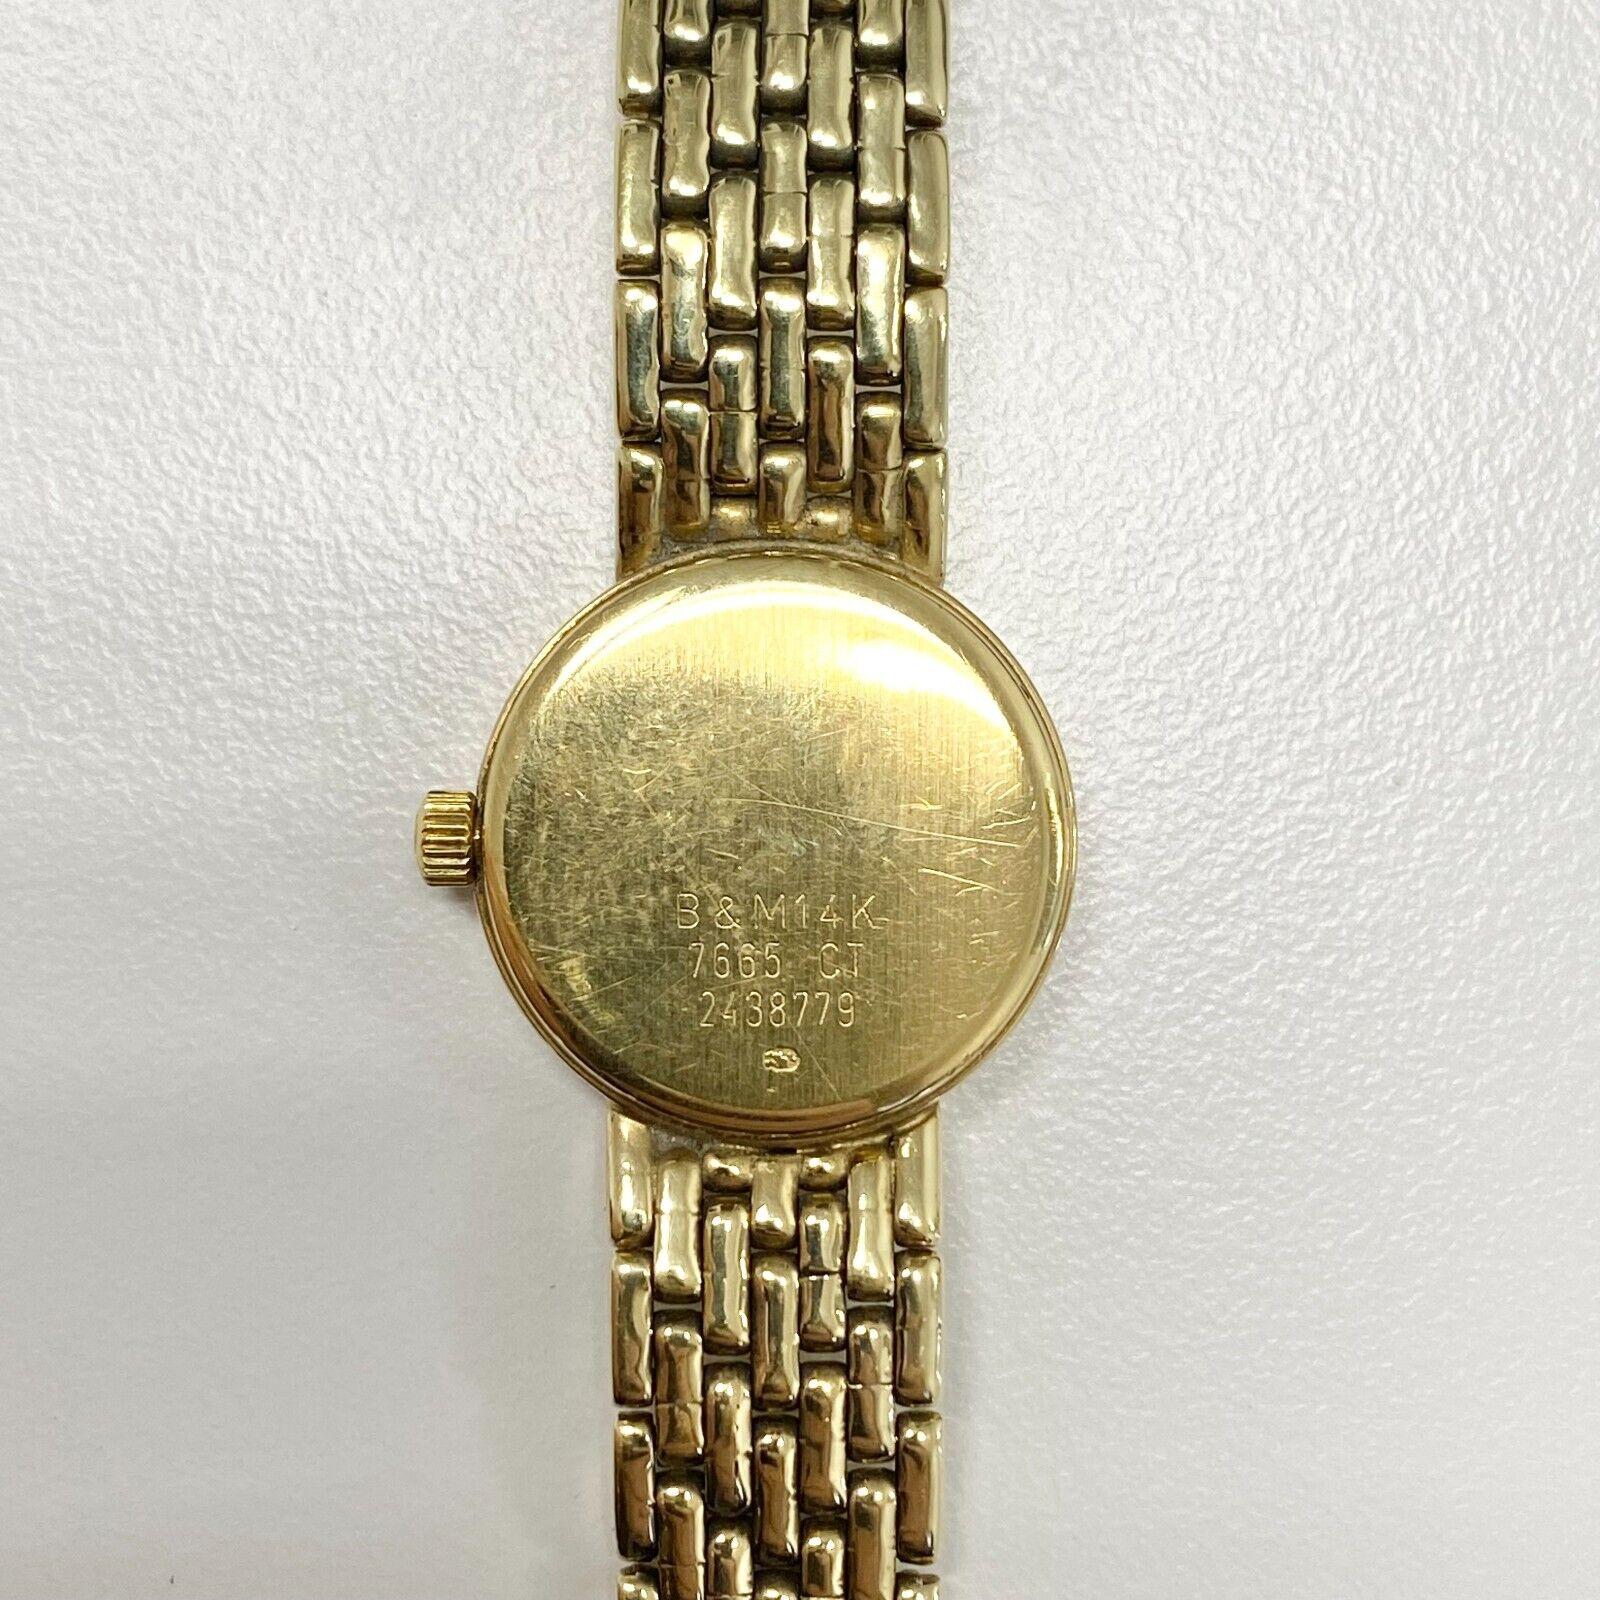 Vintage Baume & Mercier 14k Solid Yellow Gold Analog Mesh Style Watch 2